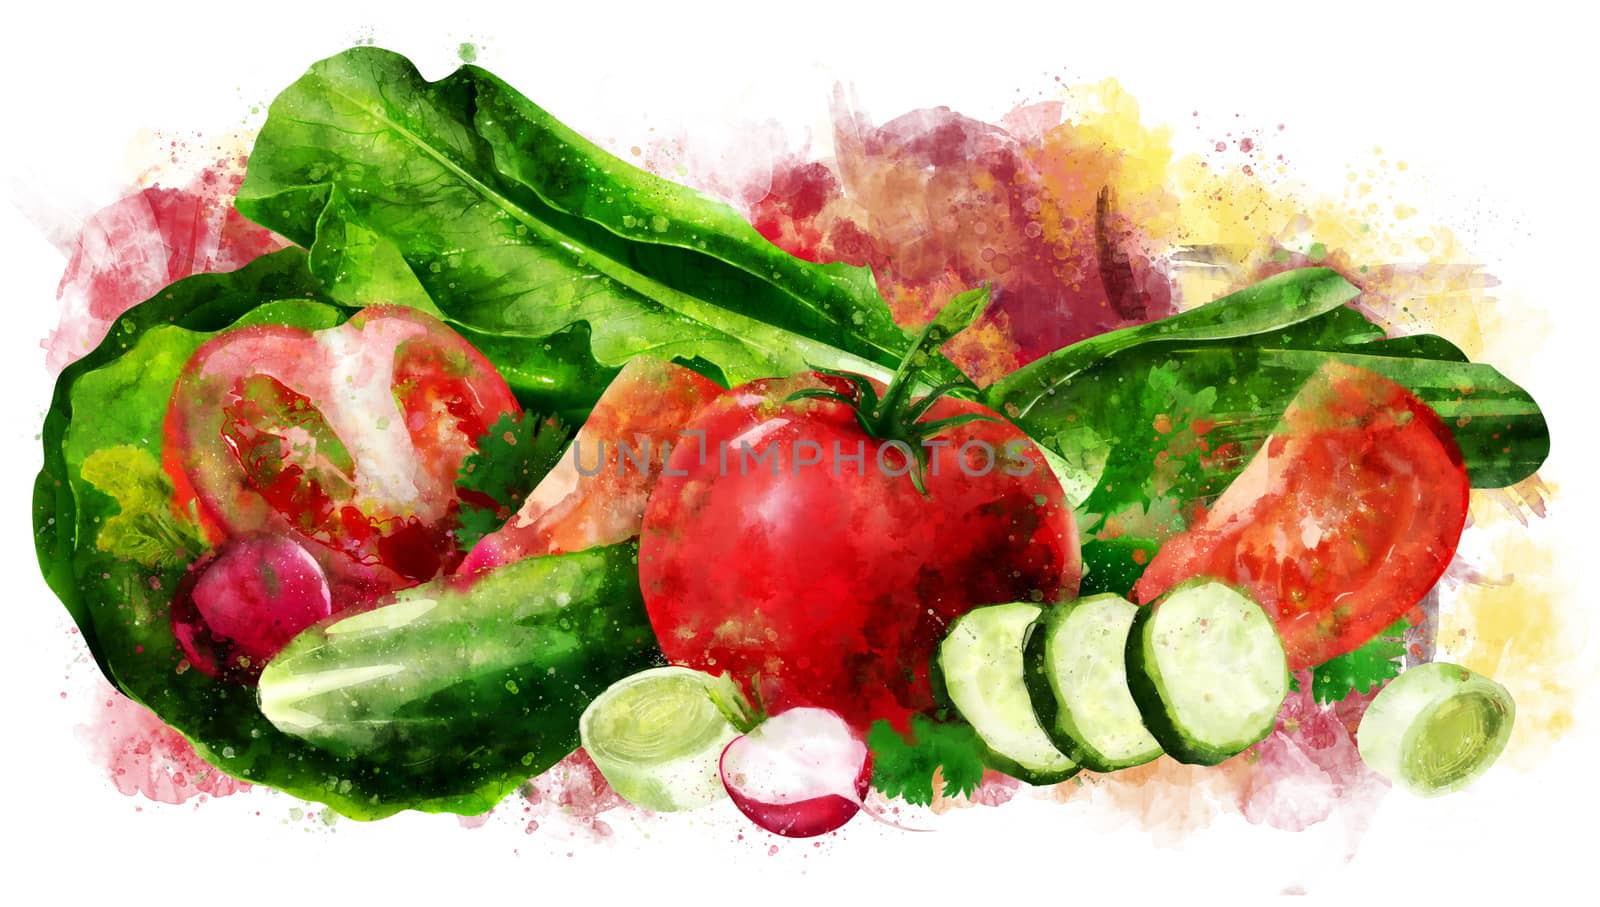 Tomato , cucumber and salad on white background. Watercolor illustration by ConceptCafe